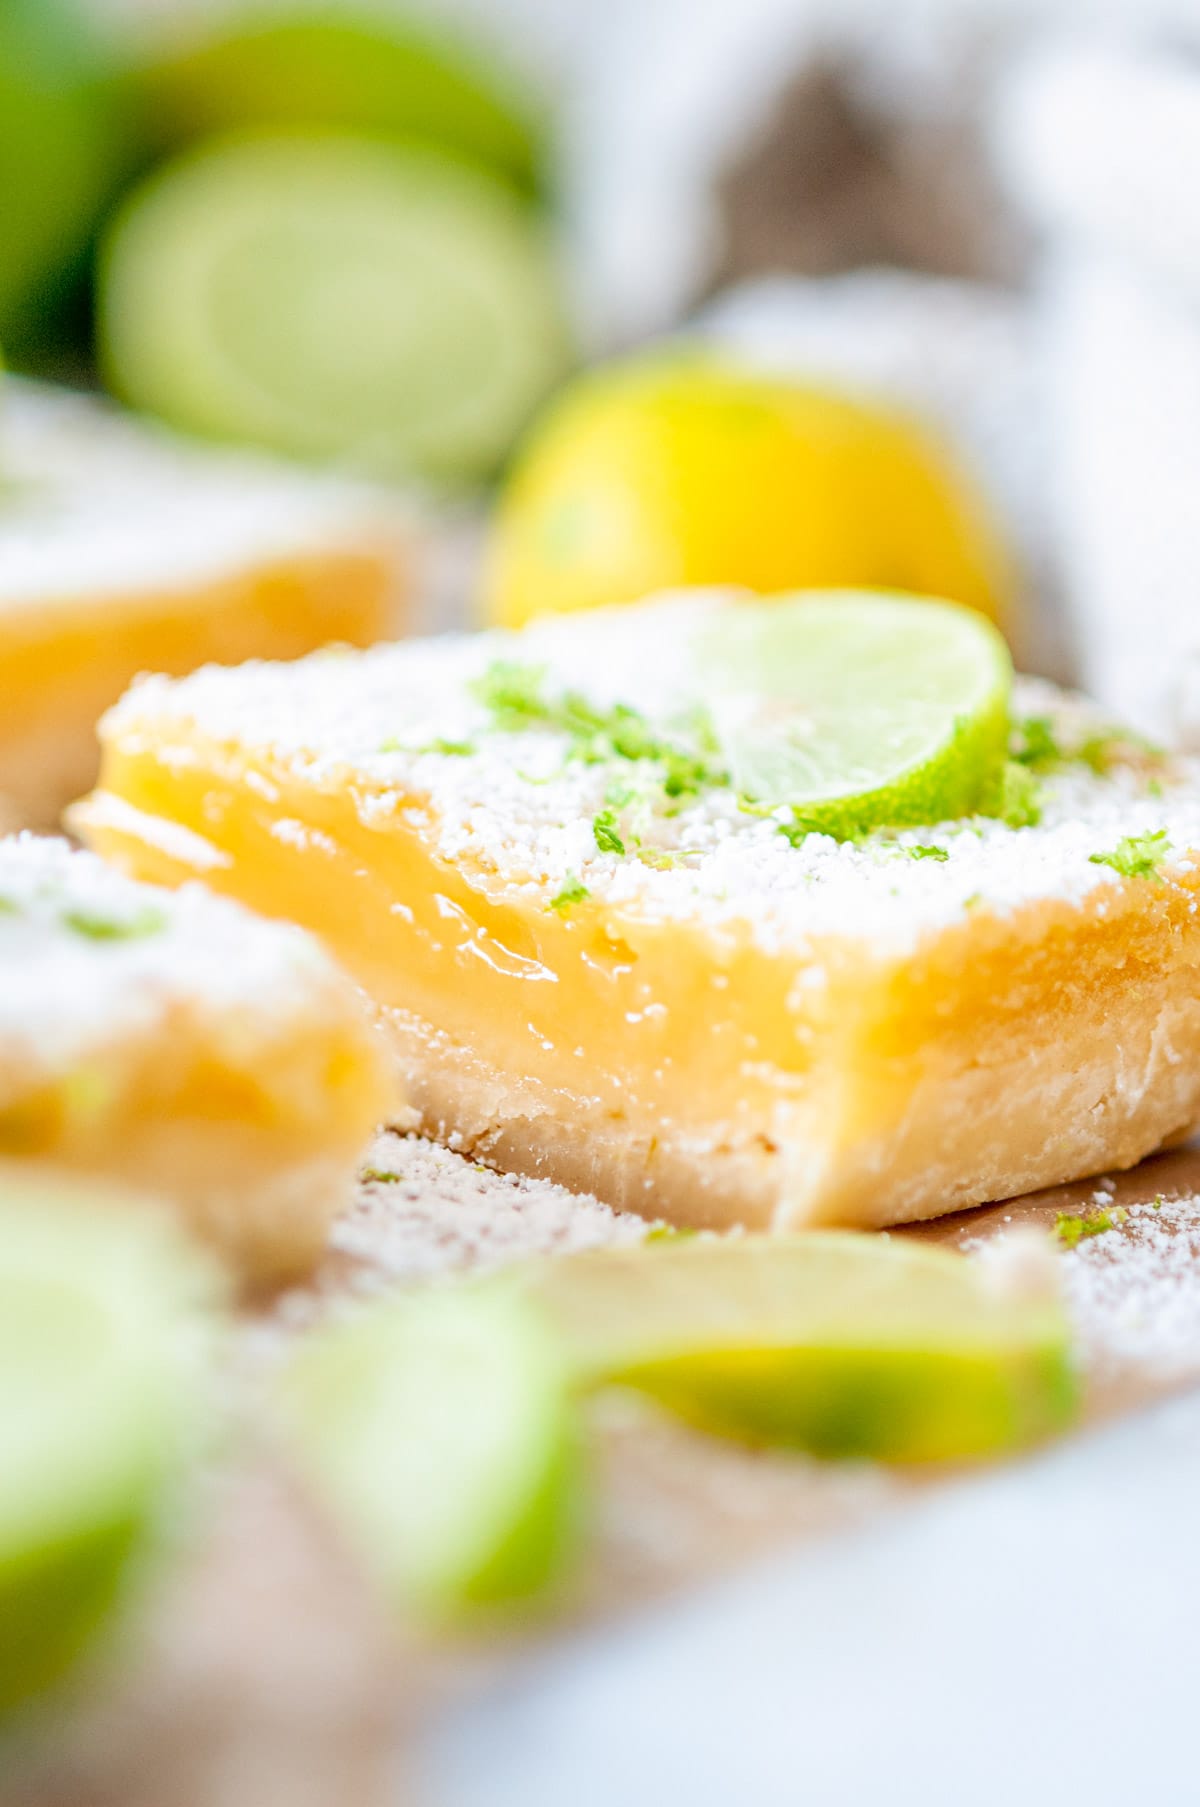 Easy Zesty Lime Bars with powdered sugar and key lime slices on brown parchment and white marble